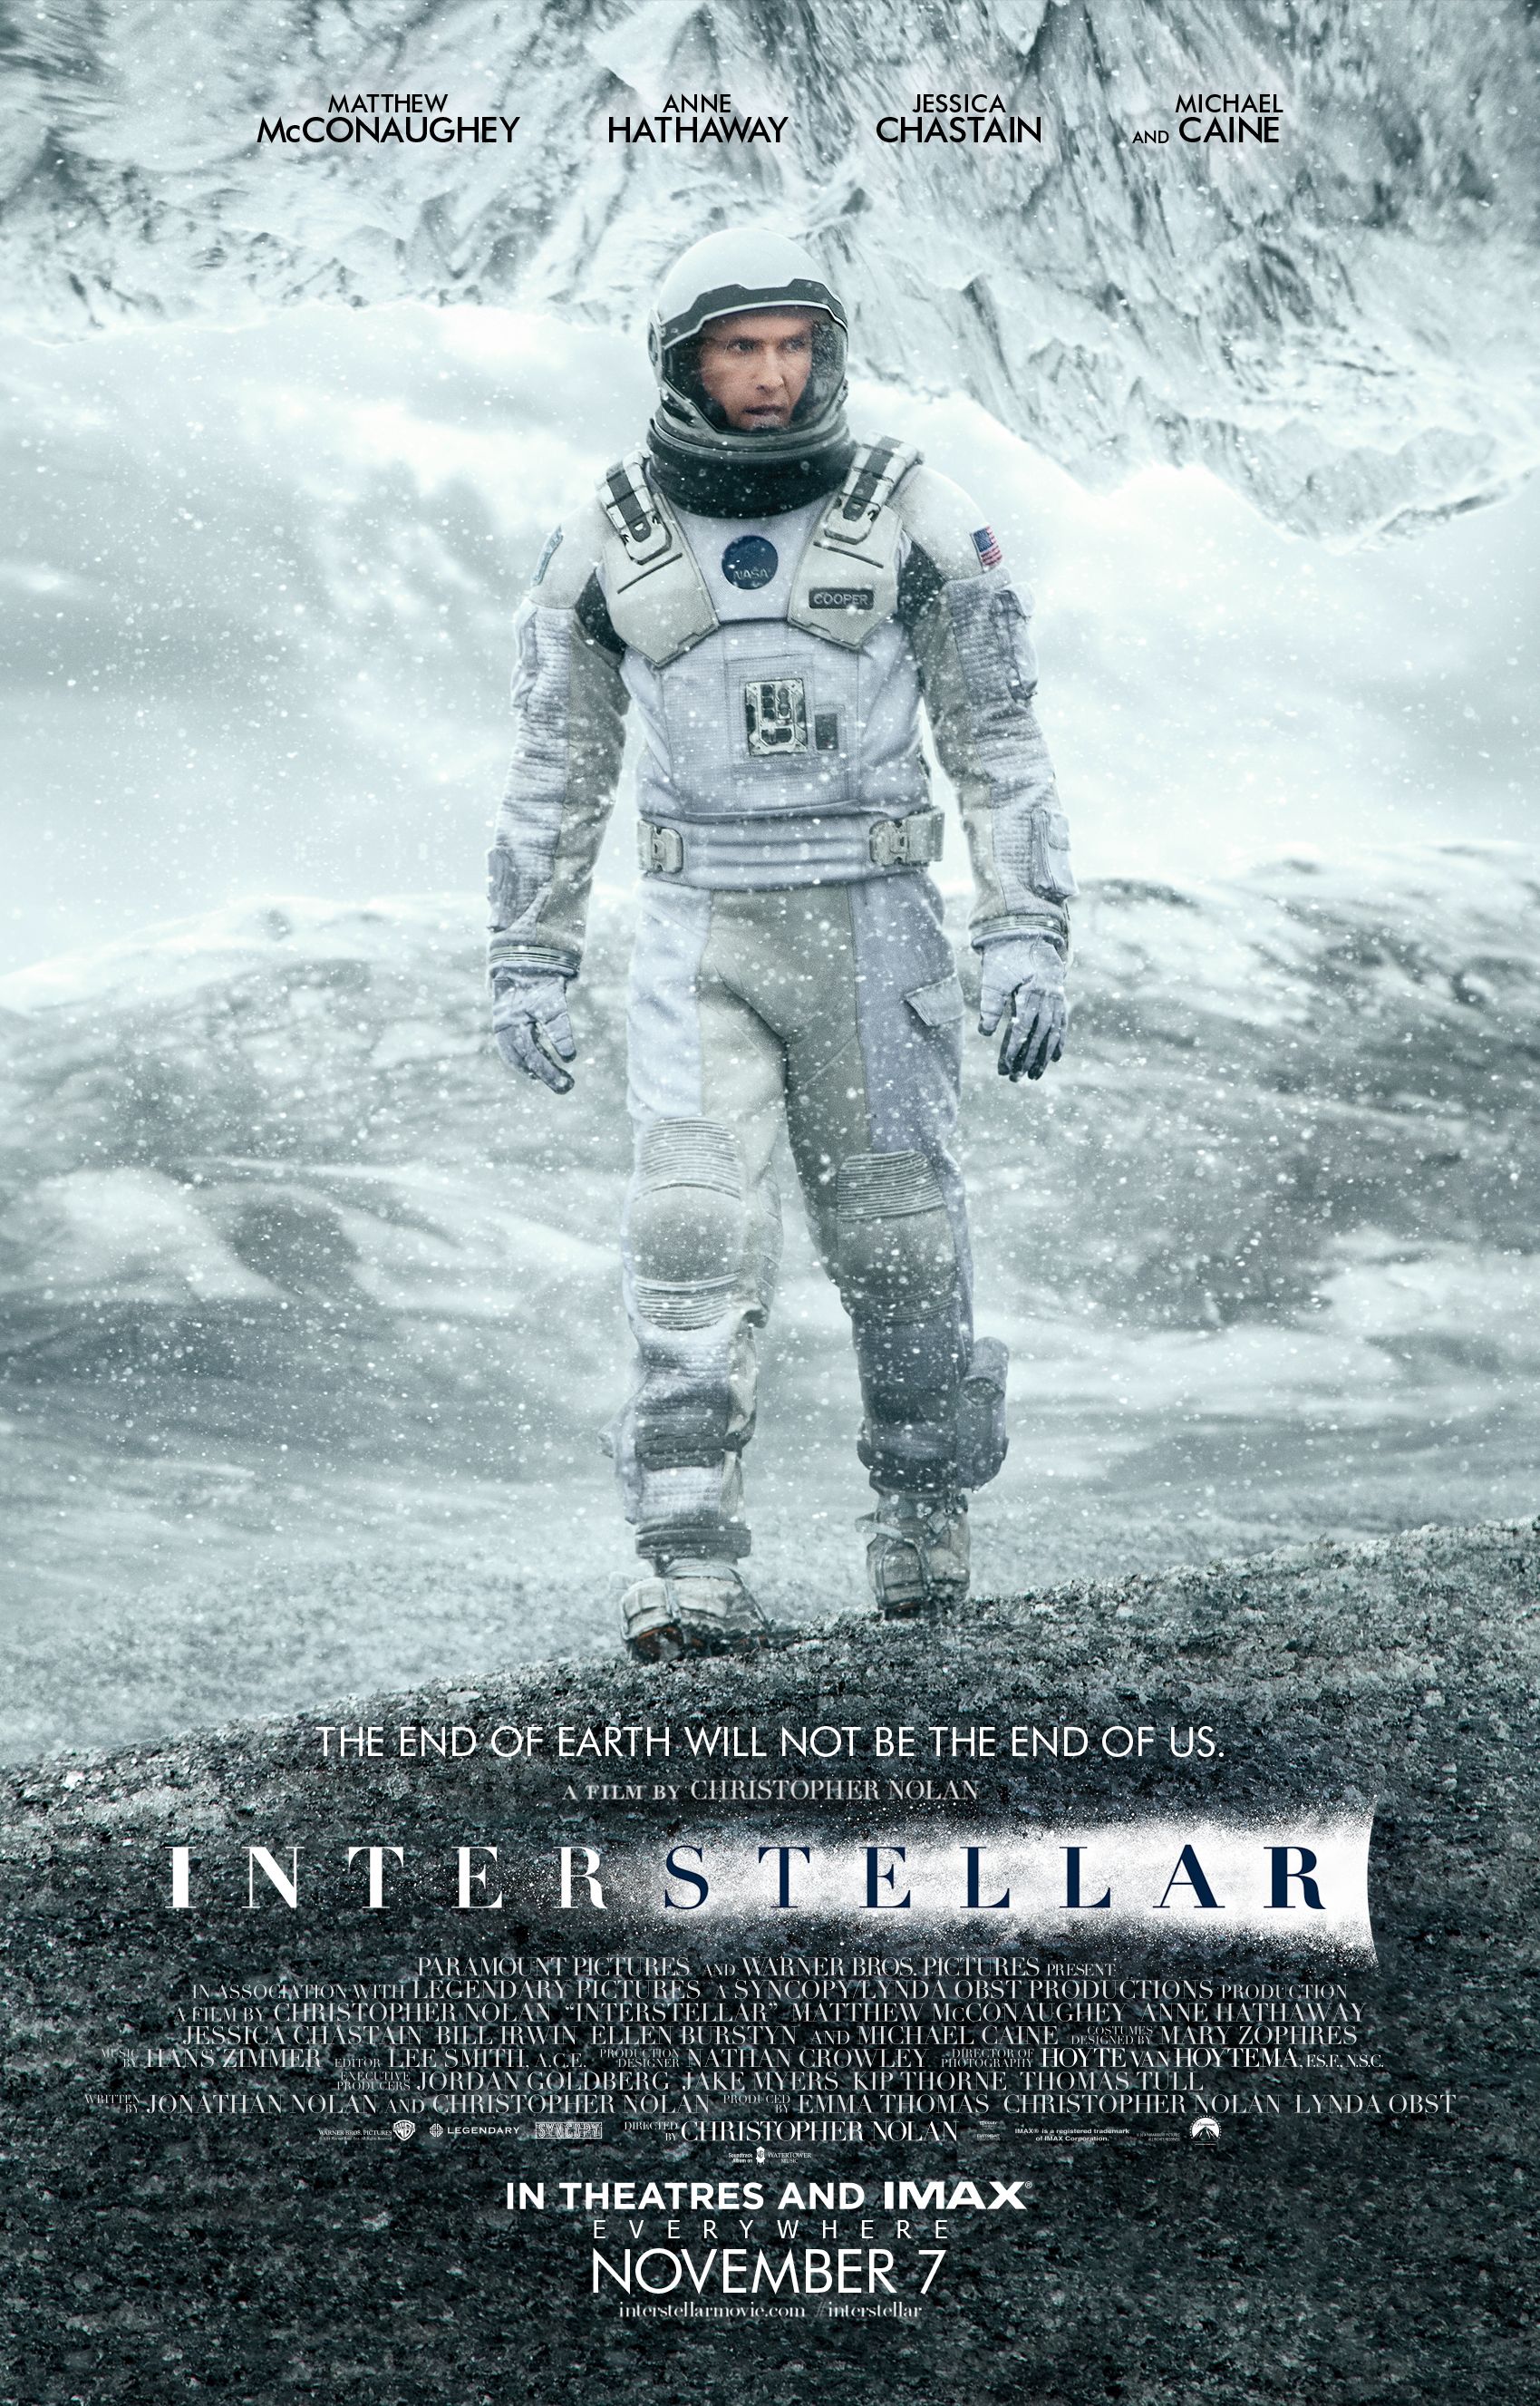 Interstellar and Into the Woods Get New Posters [Updated]